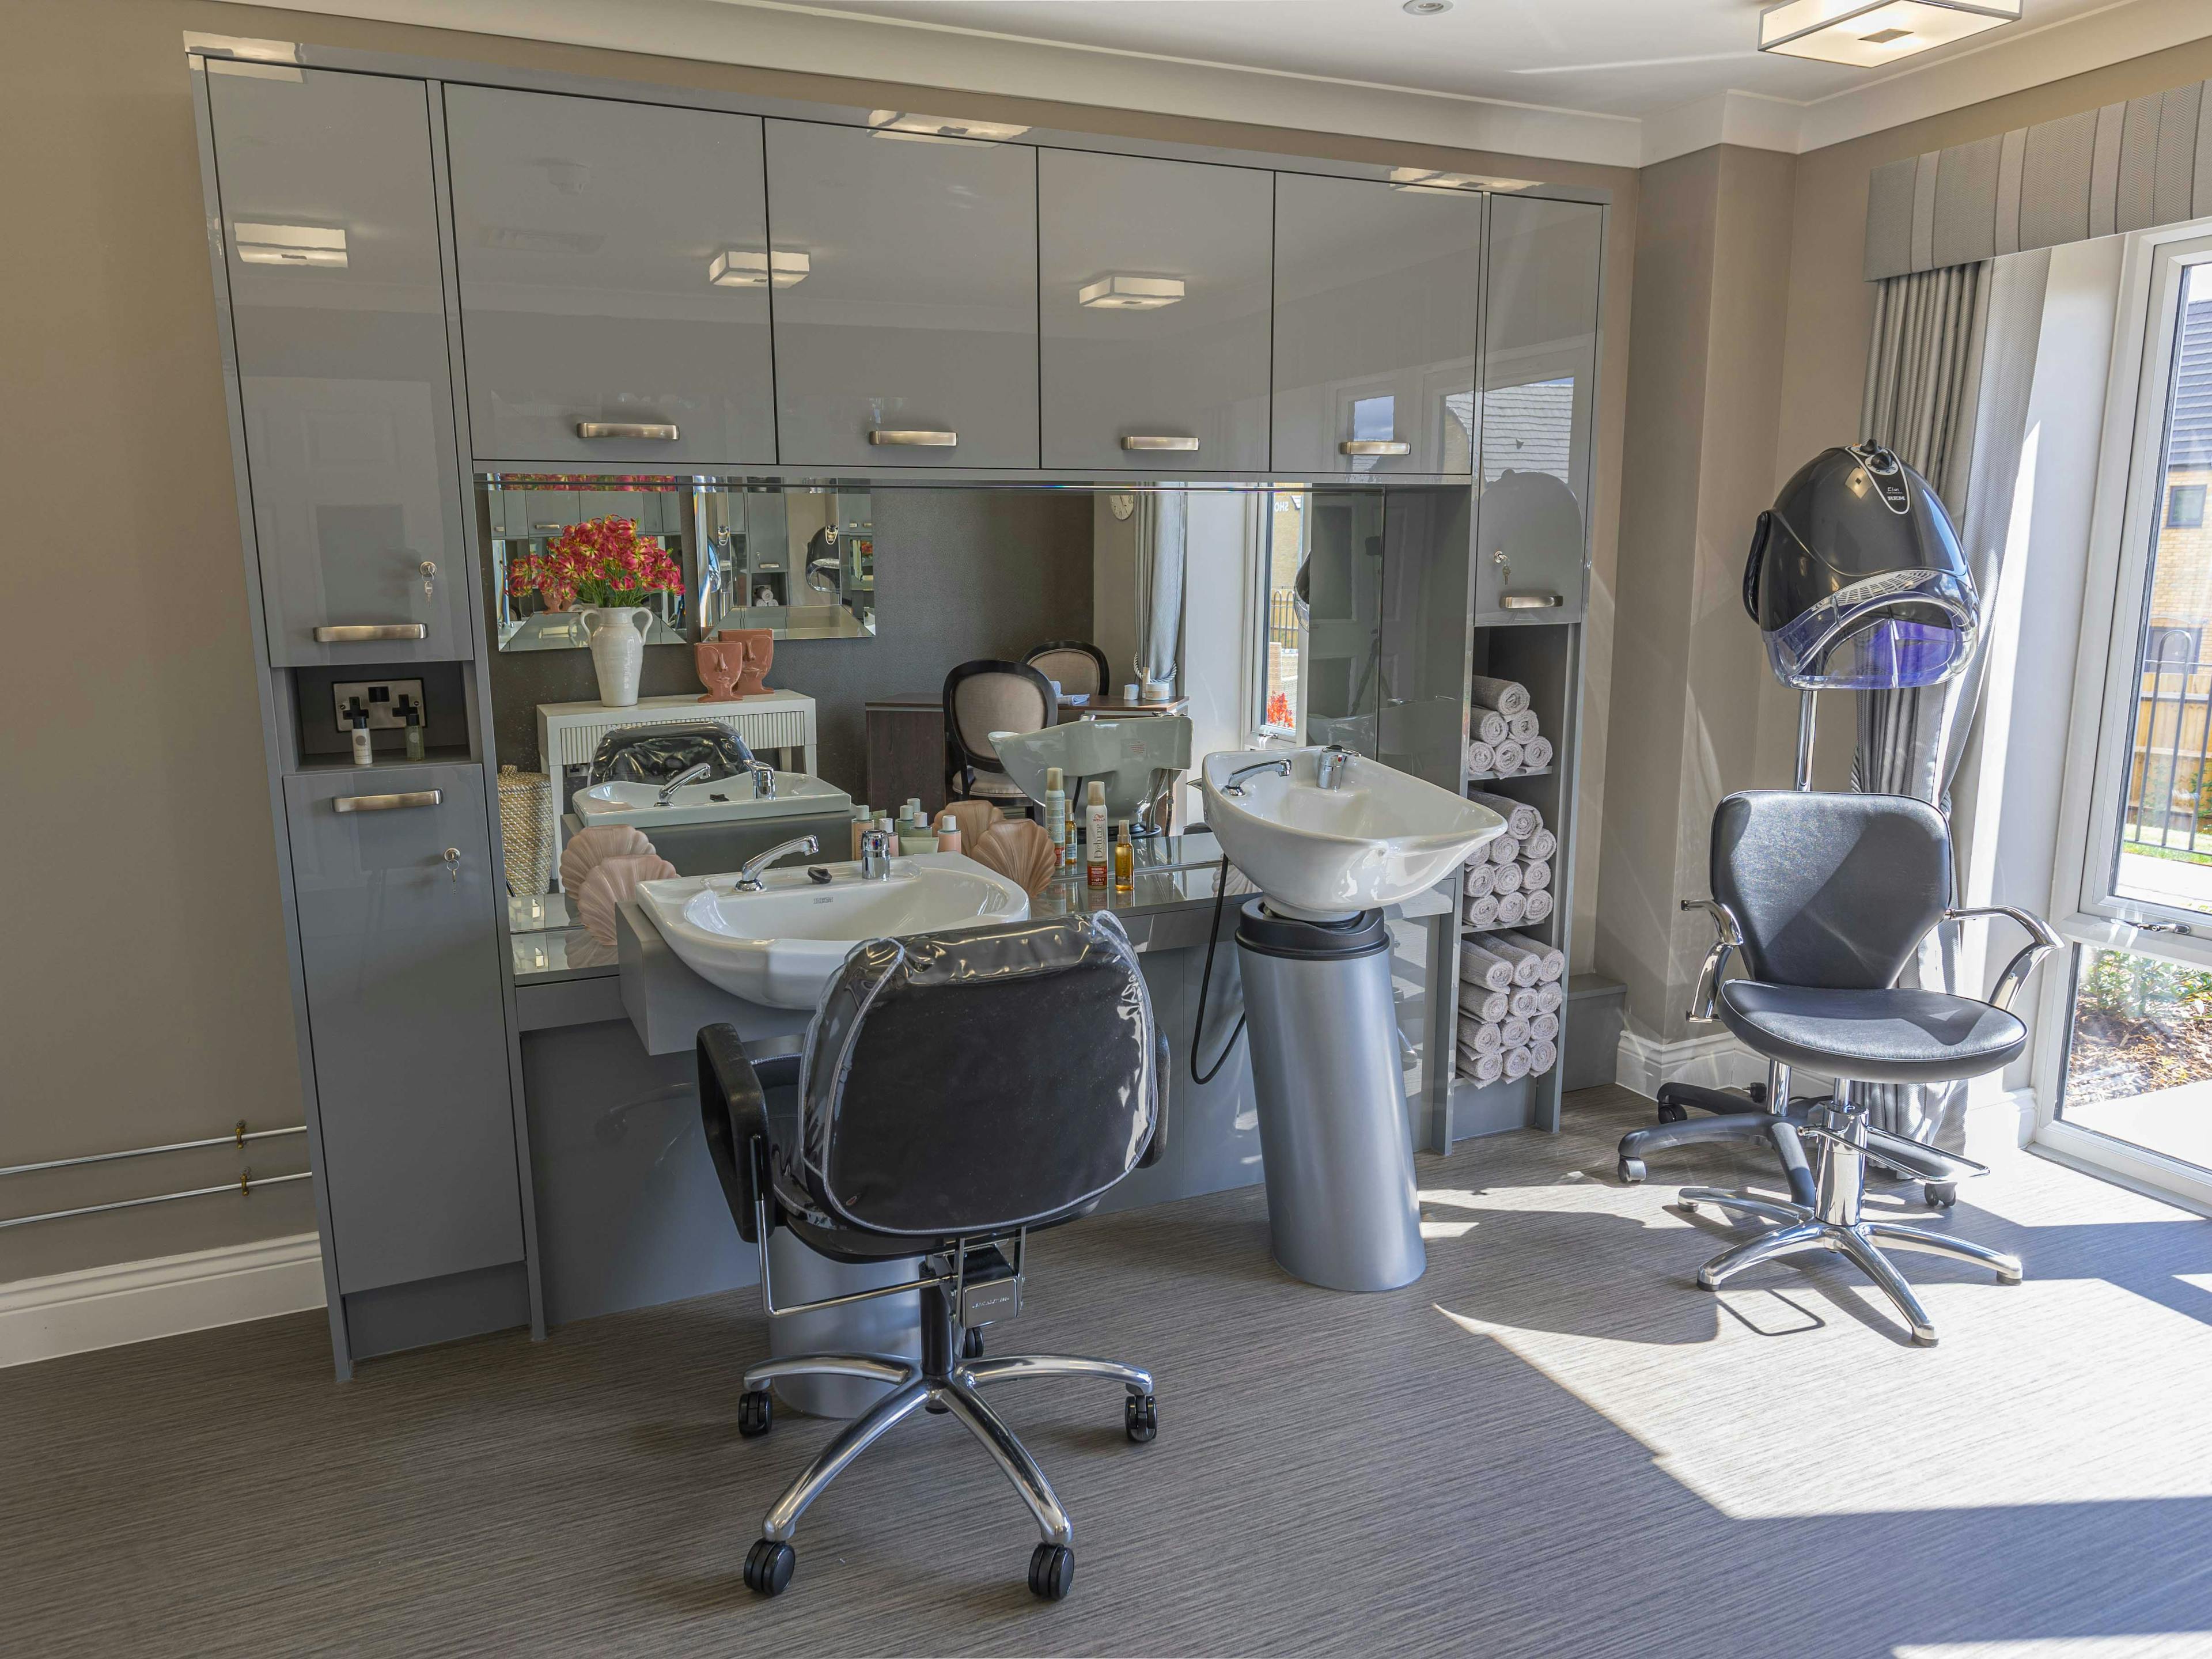 Salon at Elgar Court Care Home in Malvern, Worcestershire